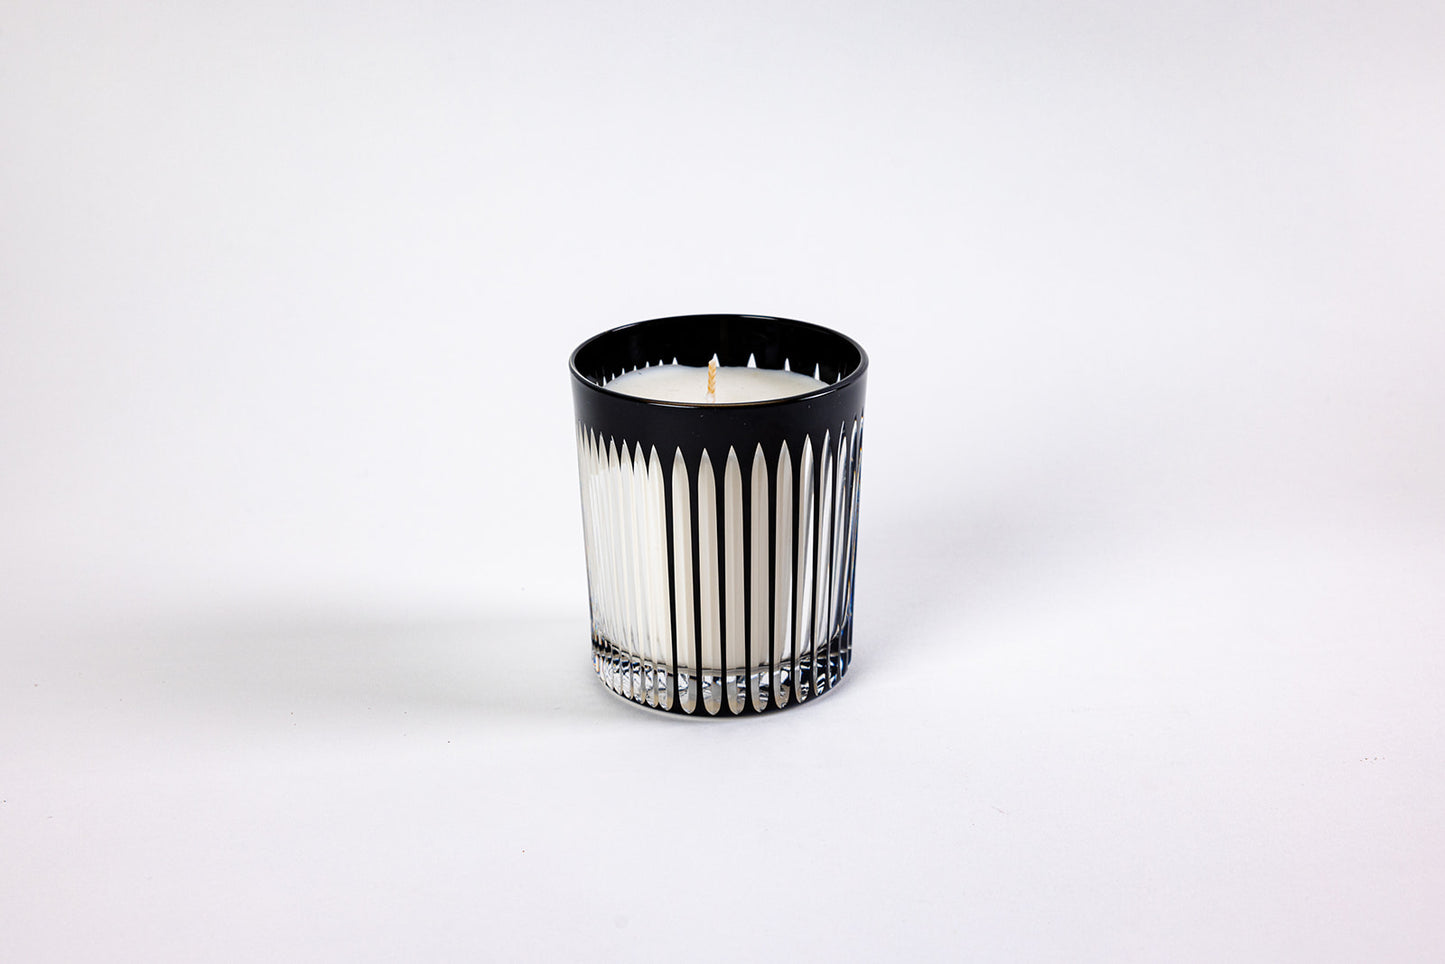 Lisc Crystal Candle